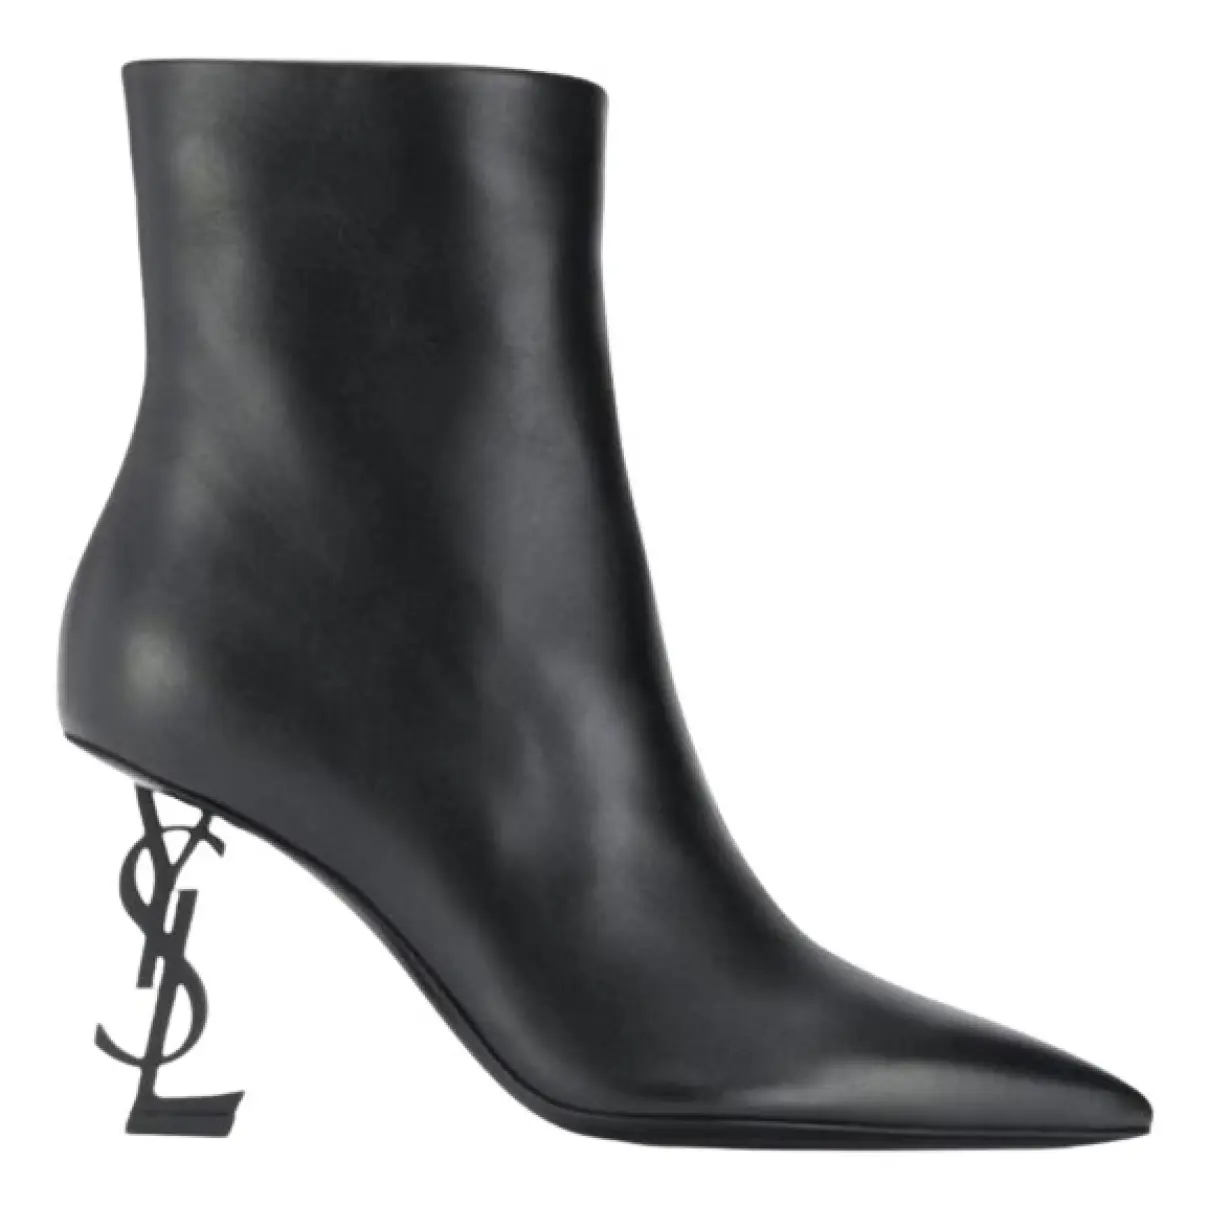 Opyum leather ankle boots